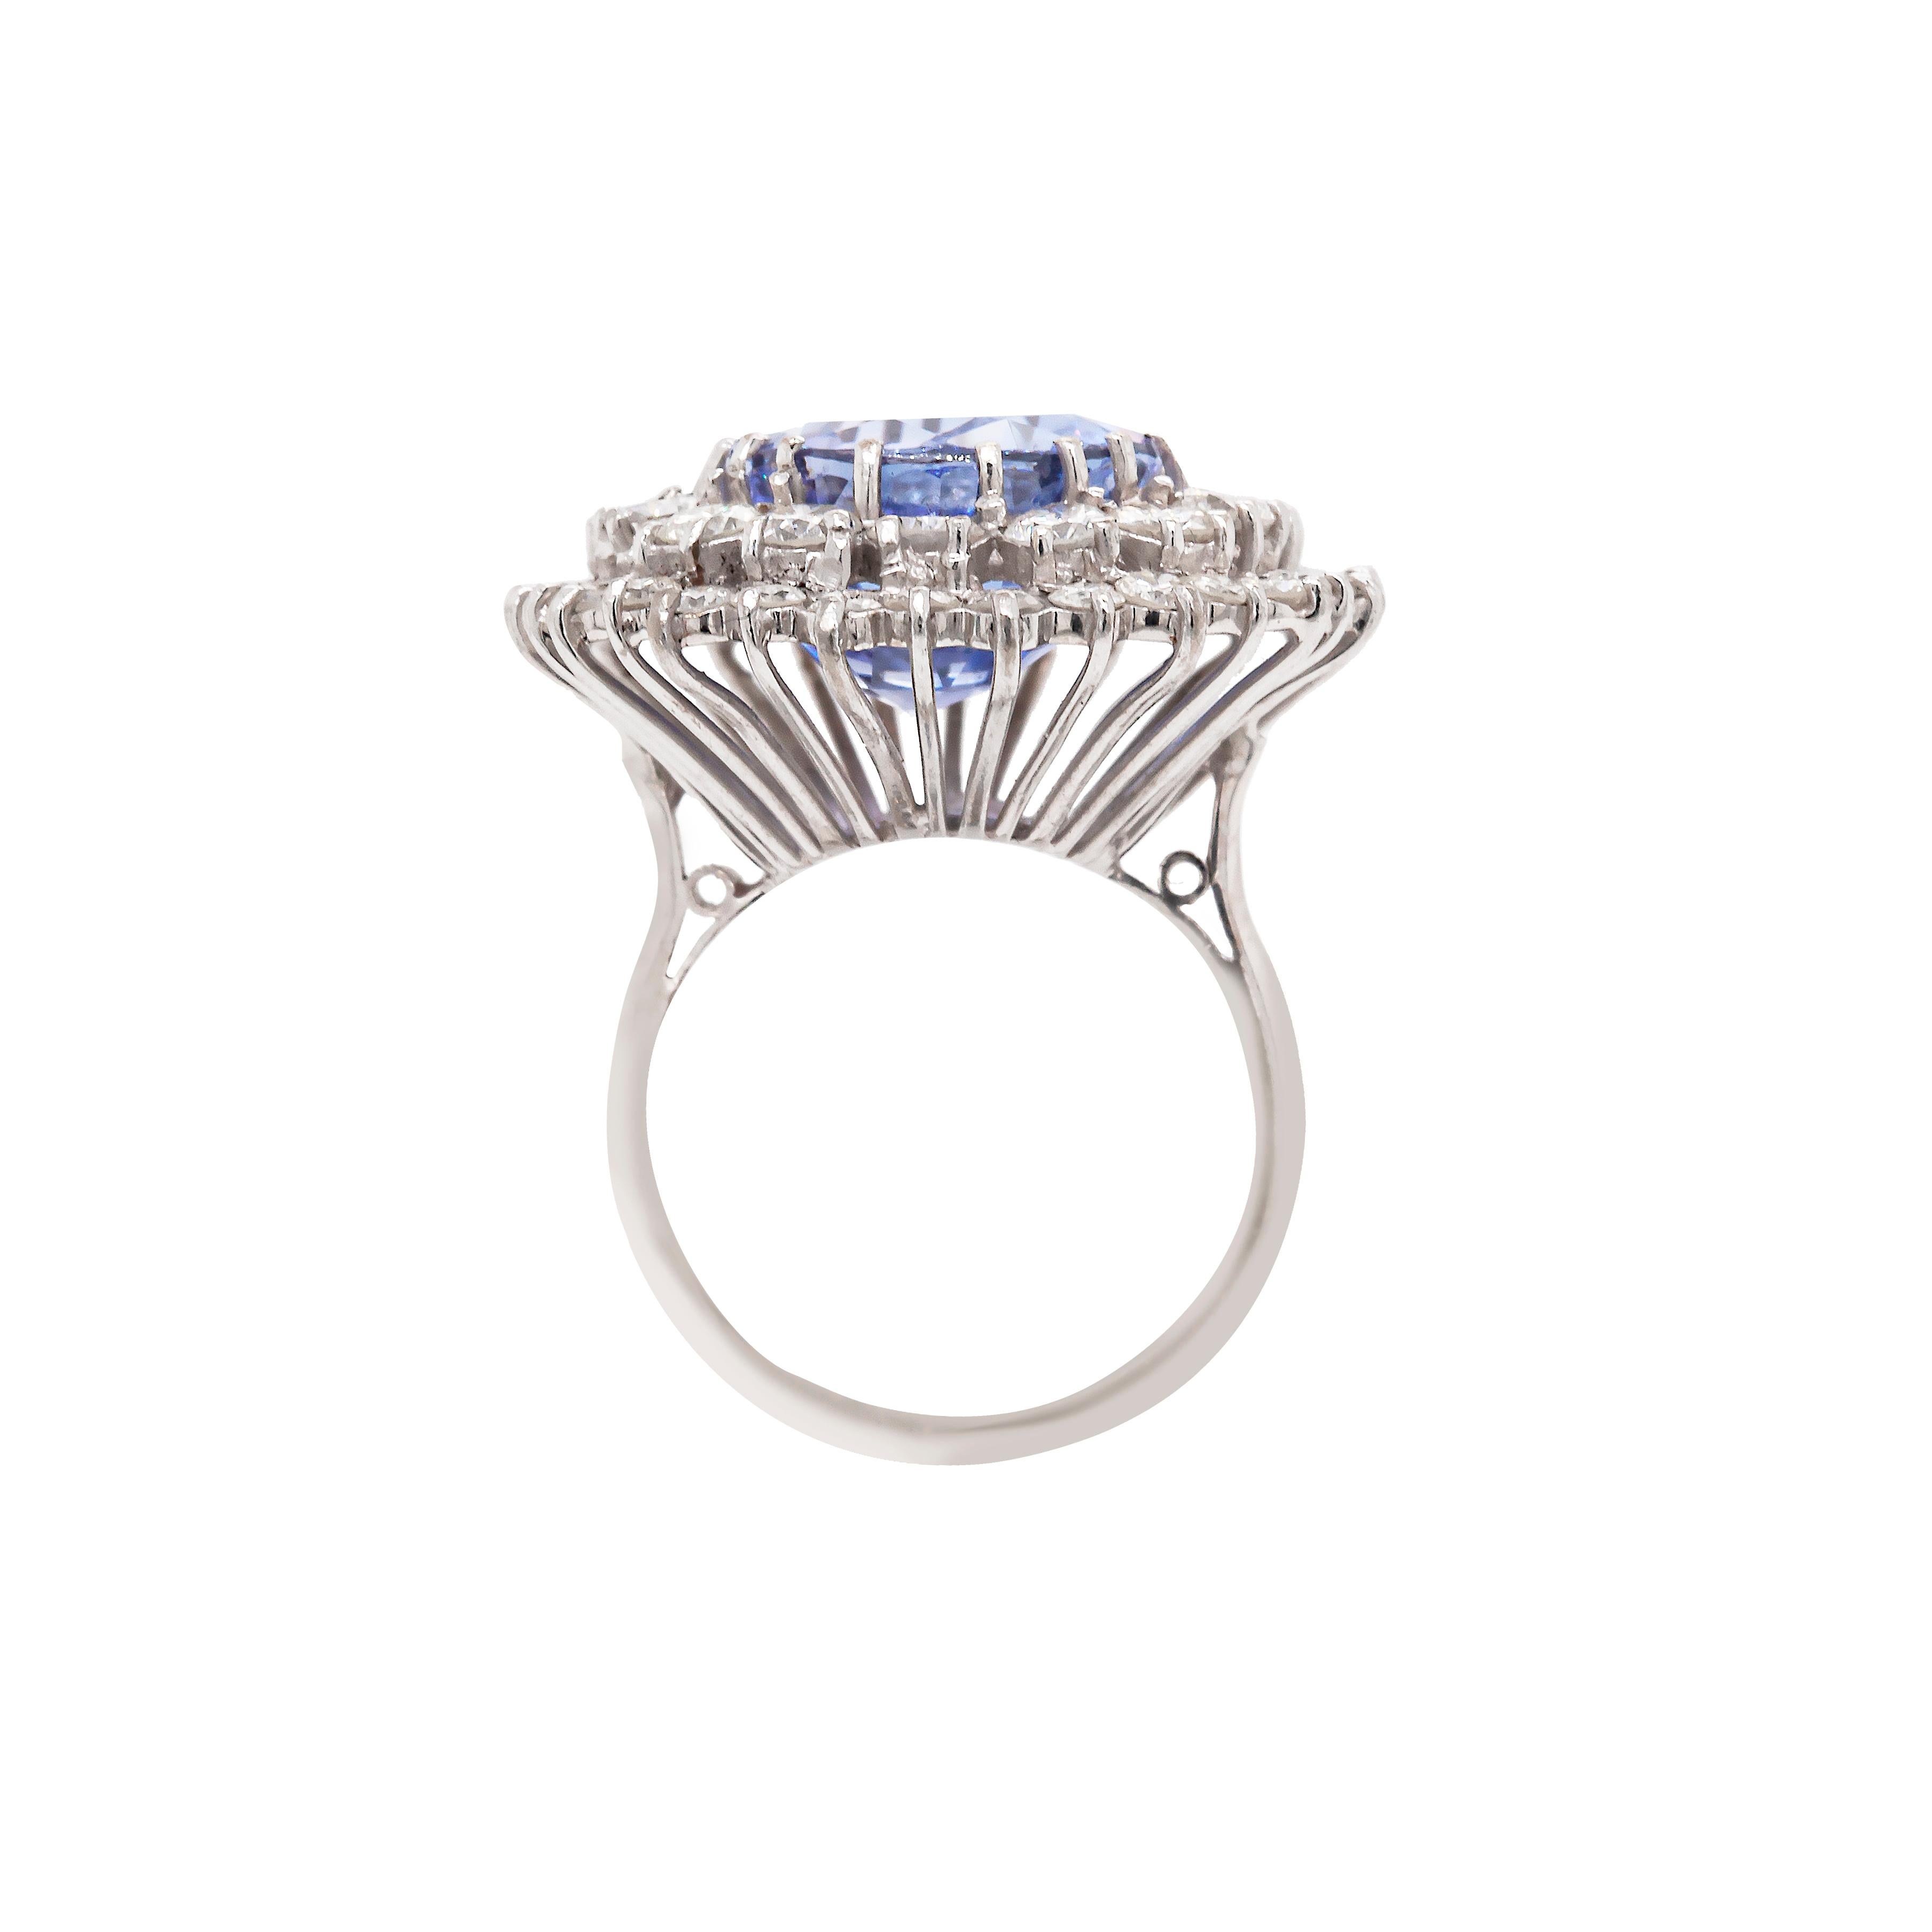 Finely crafted in 18 carat white gold, this cocktail cluster ring is a fantastic work of art sure to make a lasting impression, not least because of its gorgeous natural colour change sapphire which takes centre stage.

At its heart sits an